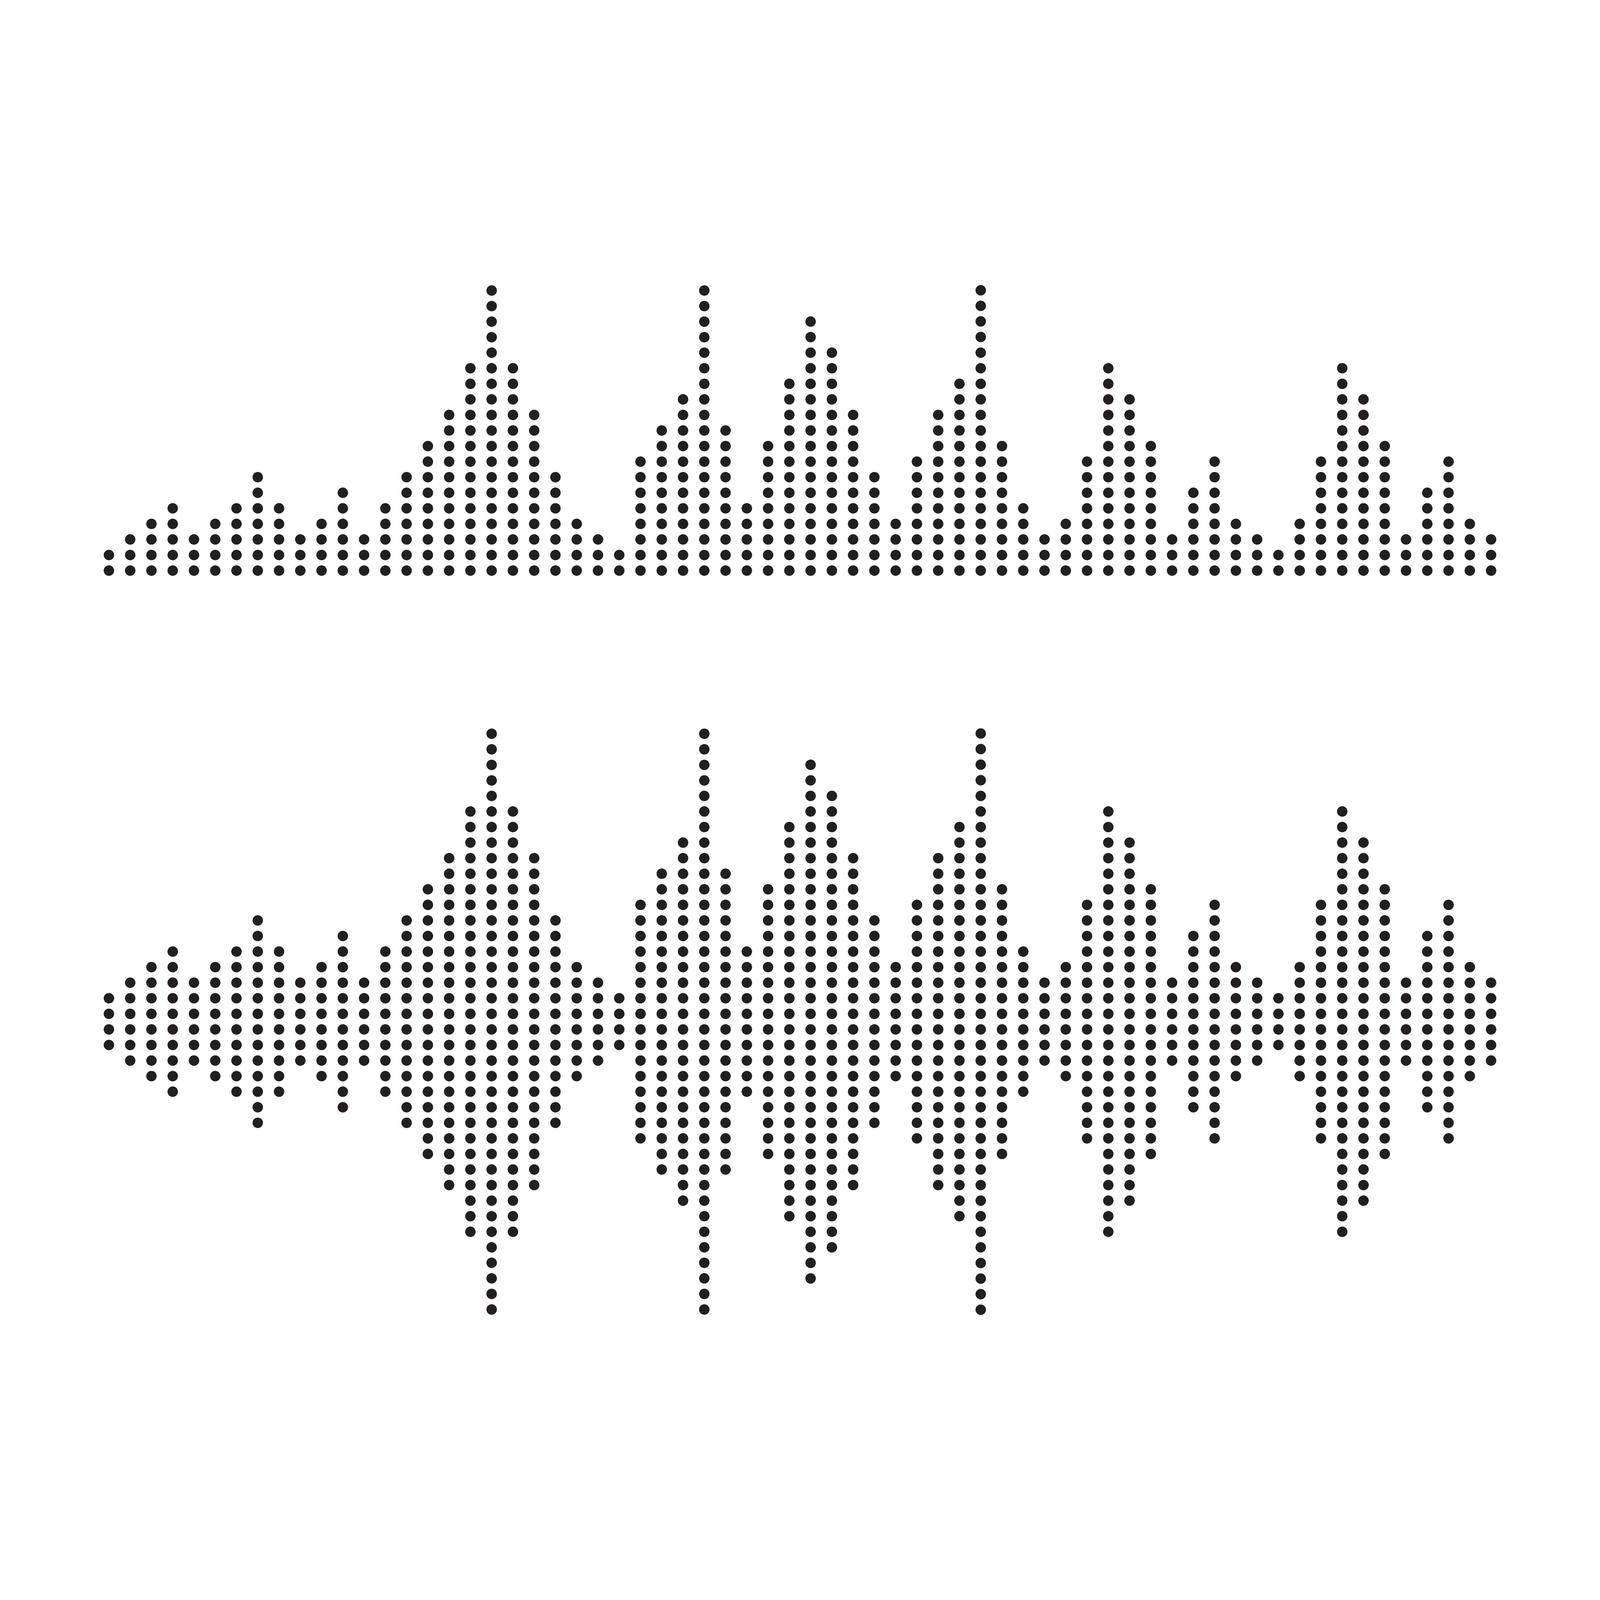 Audio technology, music sound waves vector icon by ichadsgn